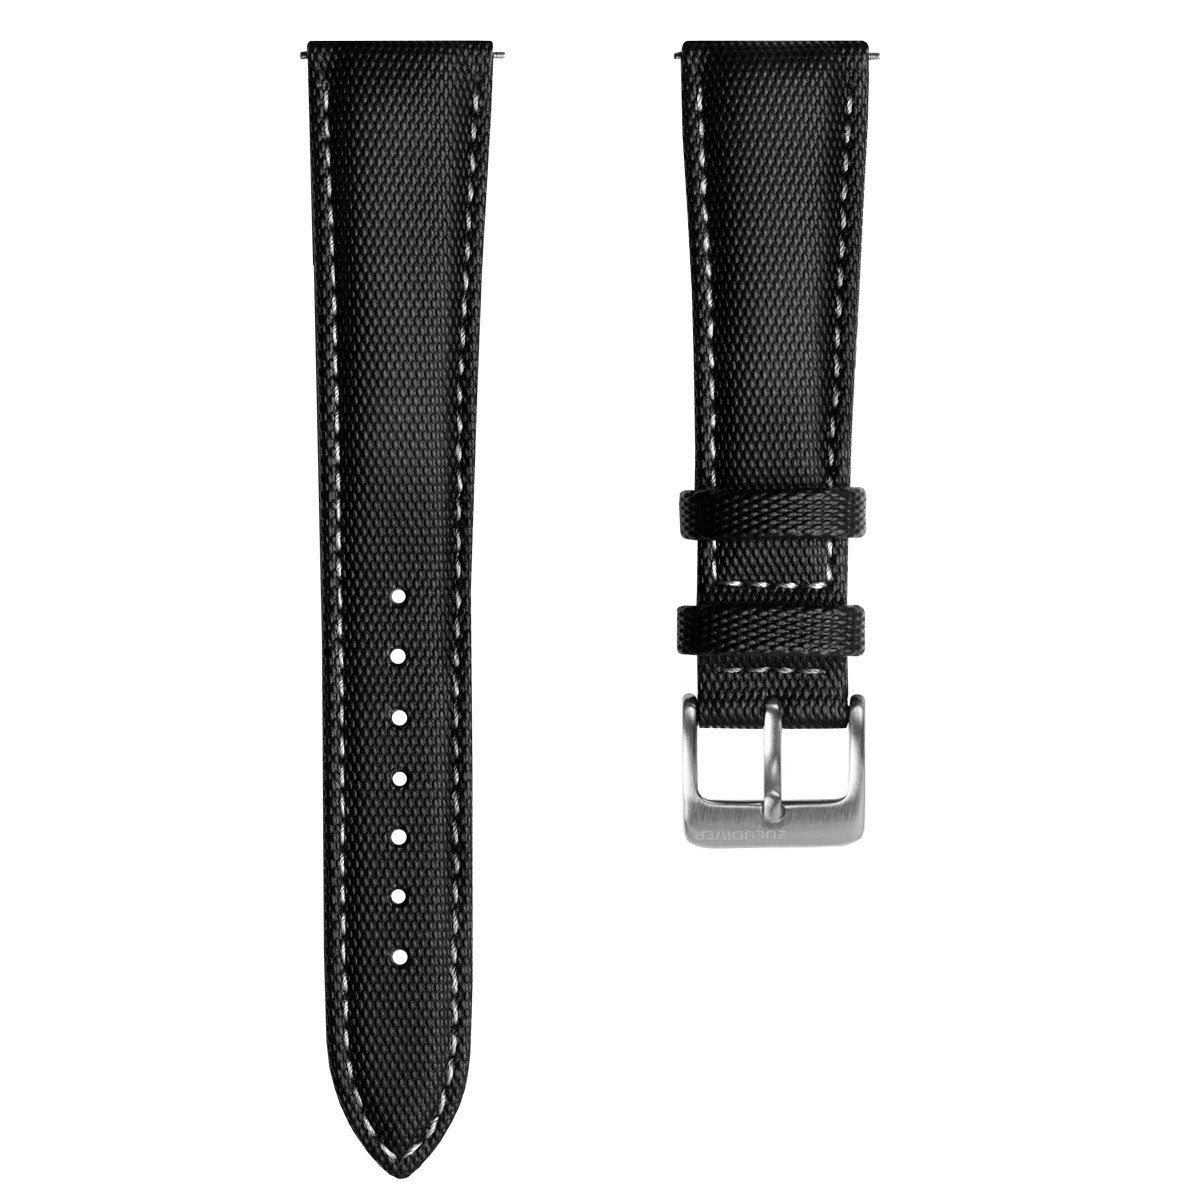 What is a Quick Release Watch Strap? - Condor Straps